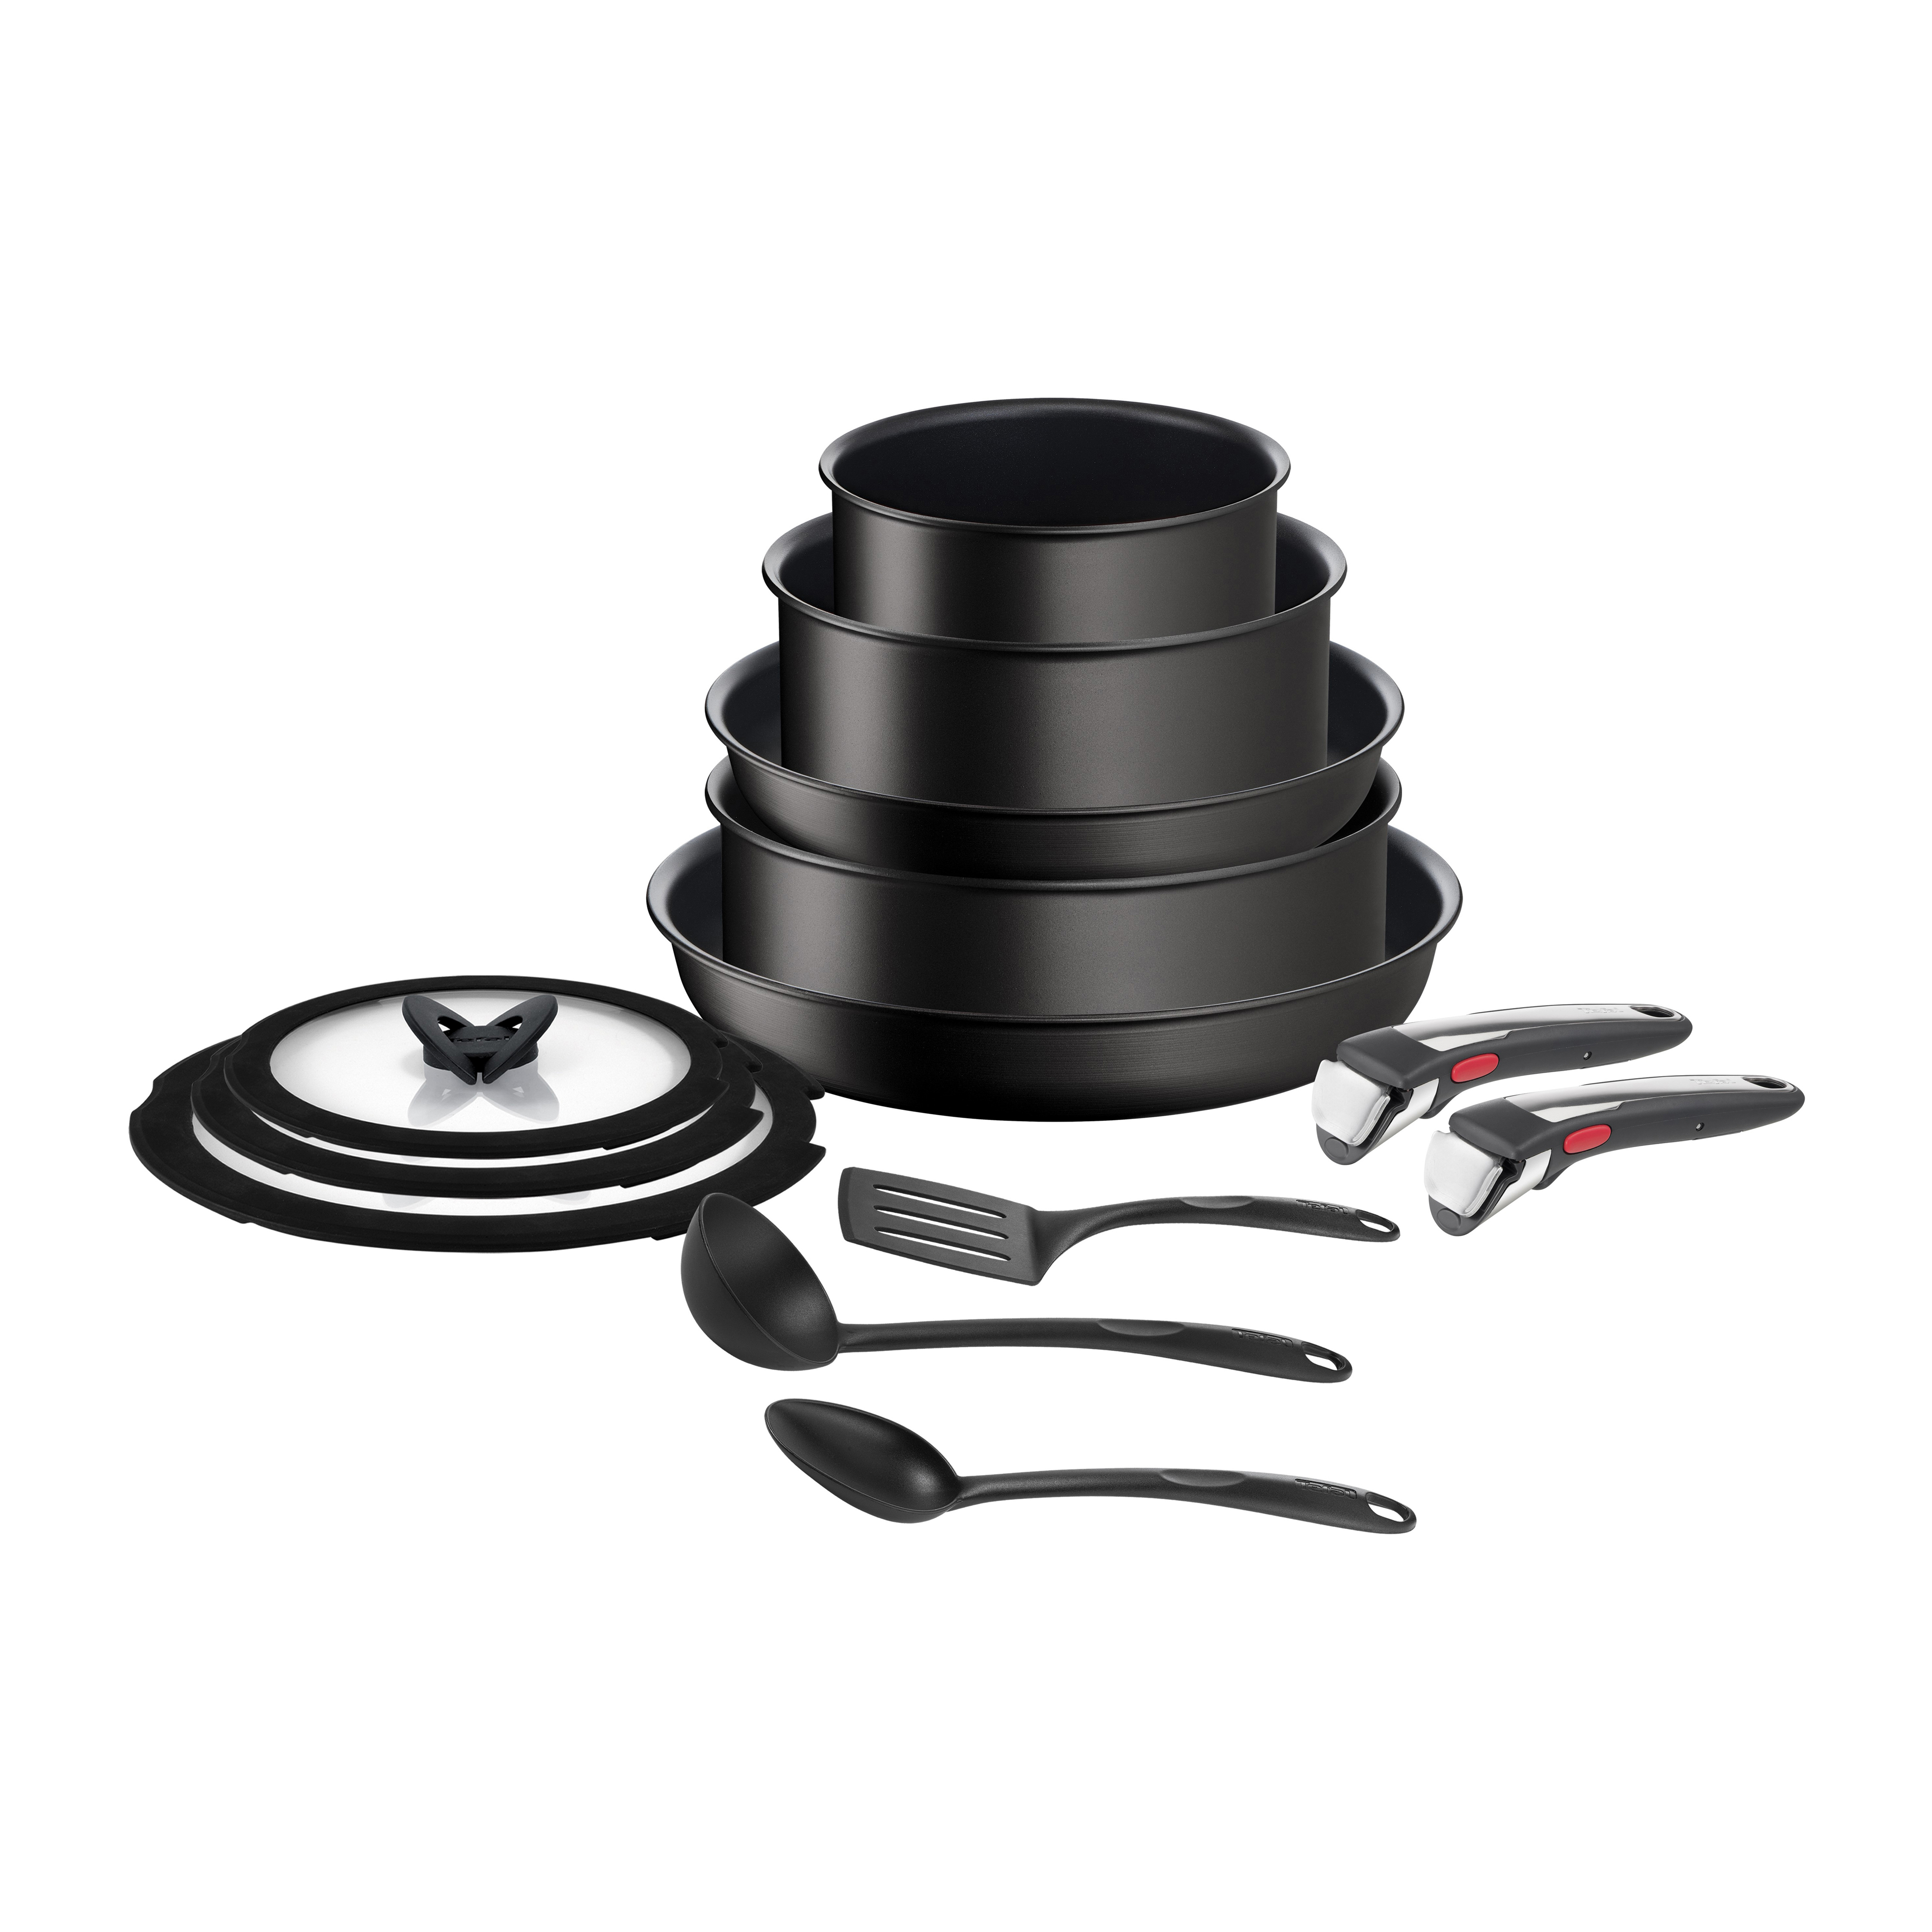 Tefal Ingenio Unlimited On 3 Piece Set, Frying Pan Set, Stackable,  Induction, Easy Cleaning, Non-Stick Coating, Heat Indicator, Black, L39591